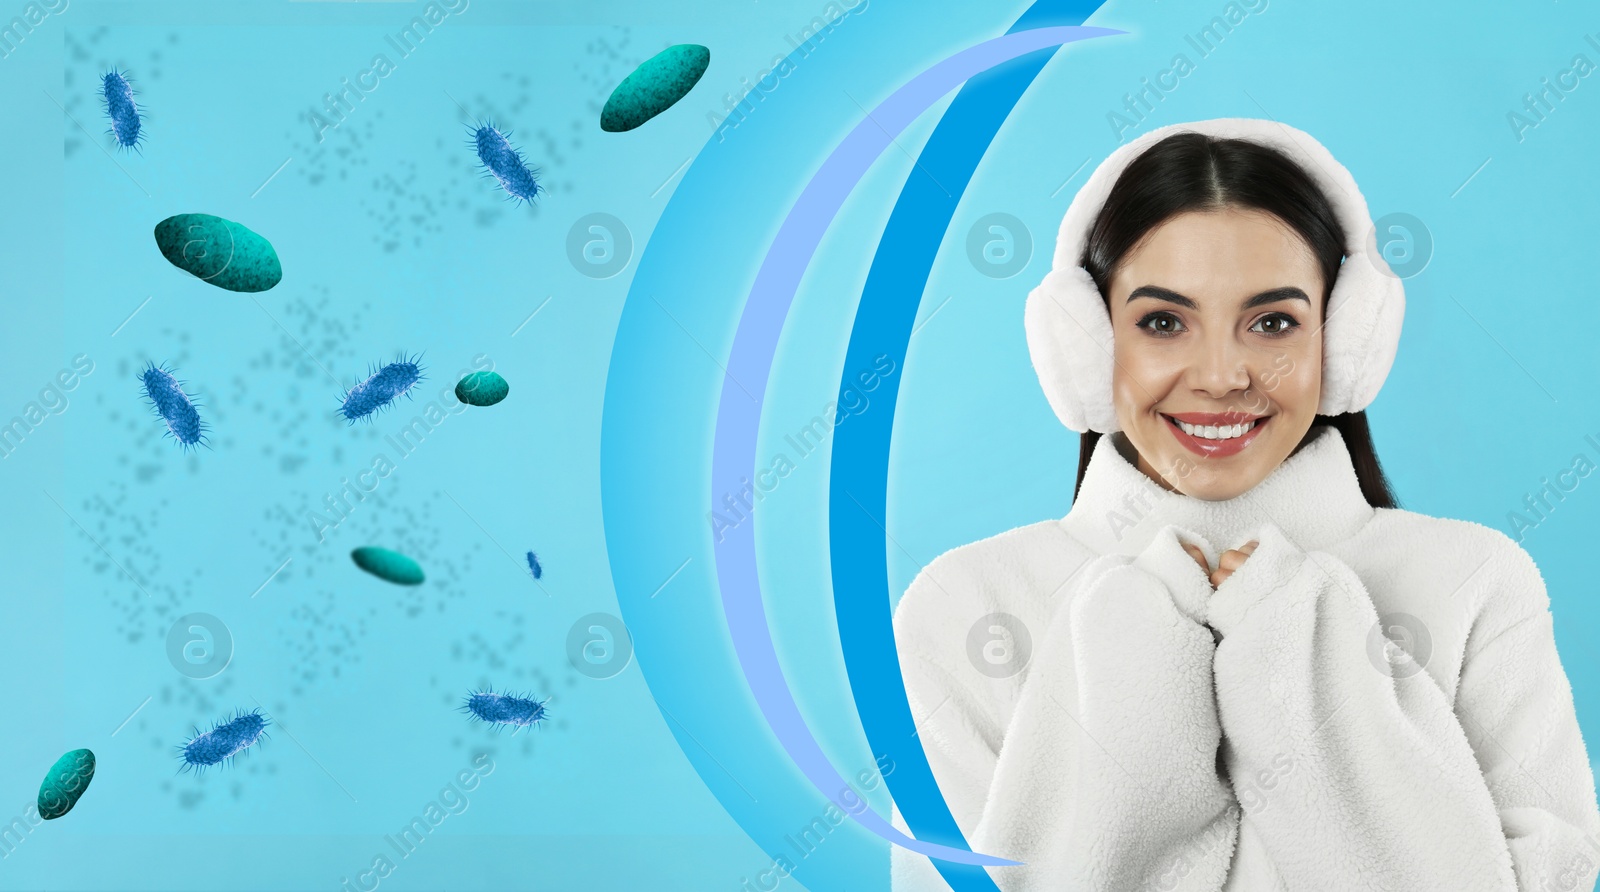 Image of Woman with strong immunity surrounded by viruses on light blue background, banner design